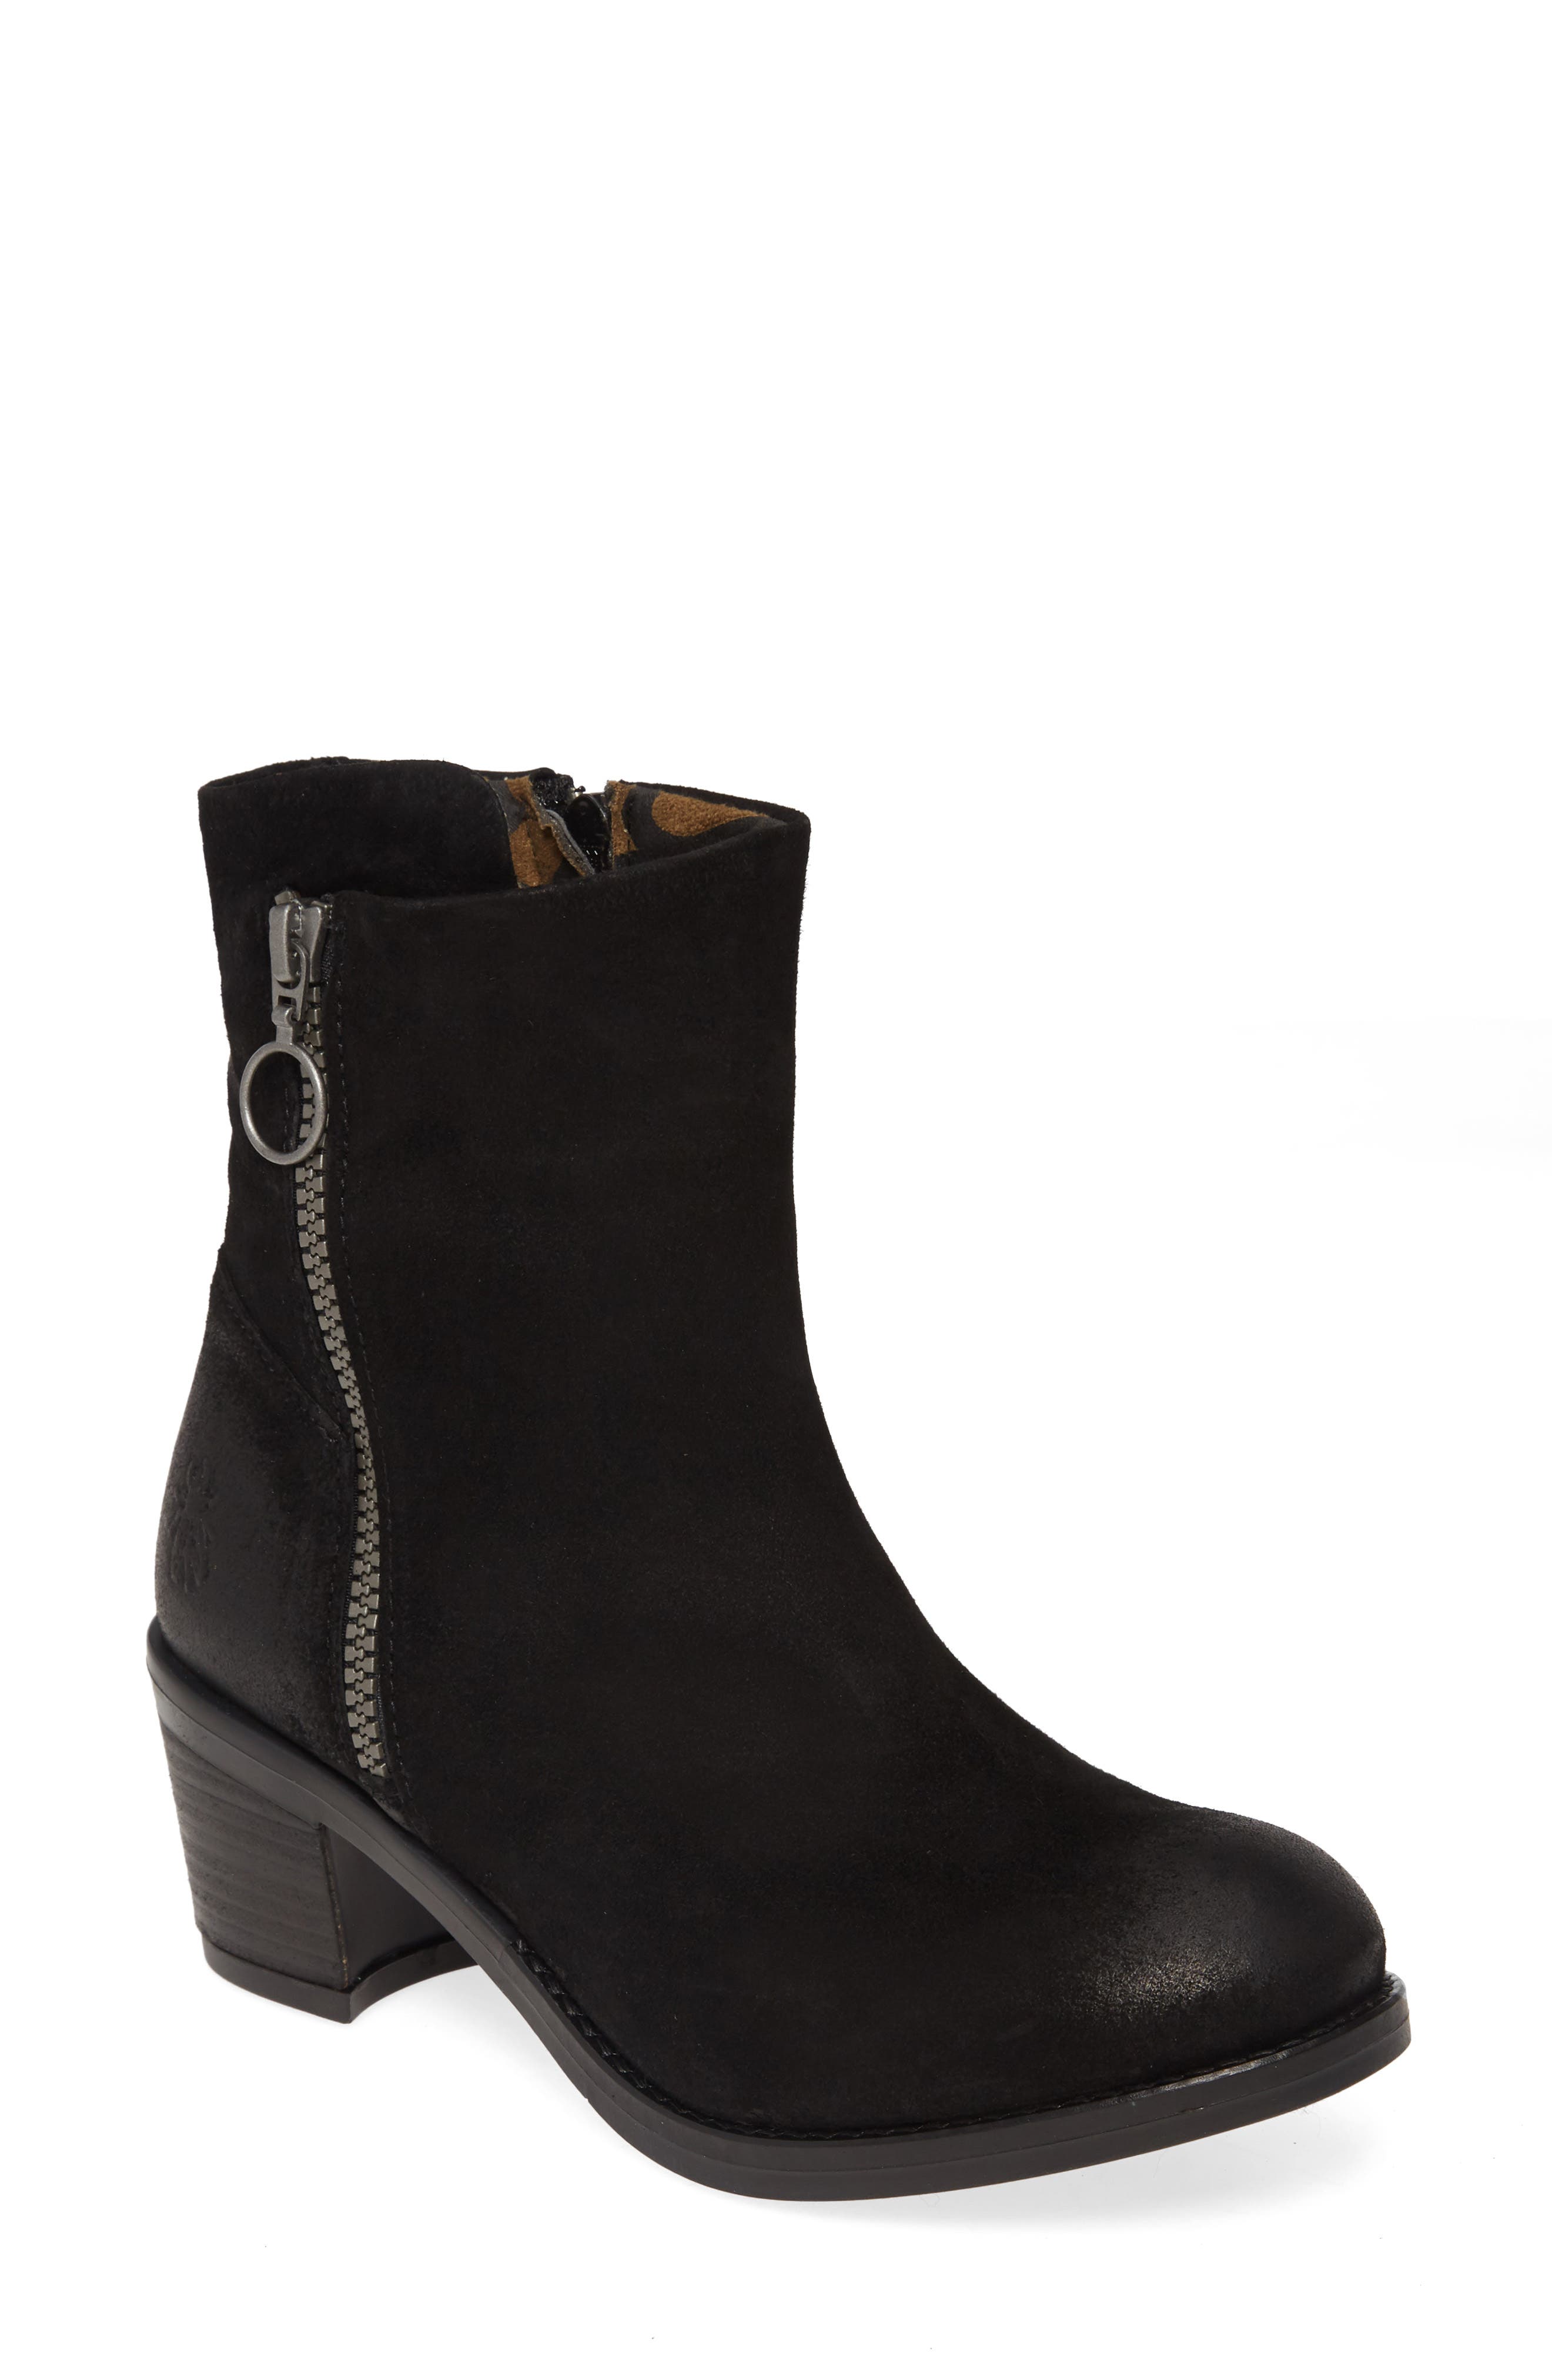 Fly London Boots \u0026 Booties | Nordstrom